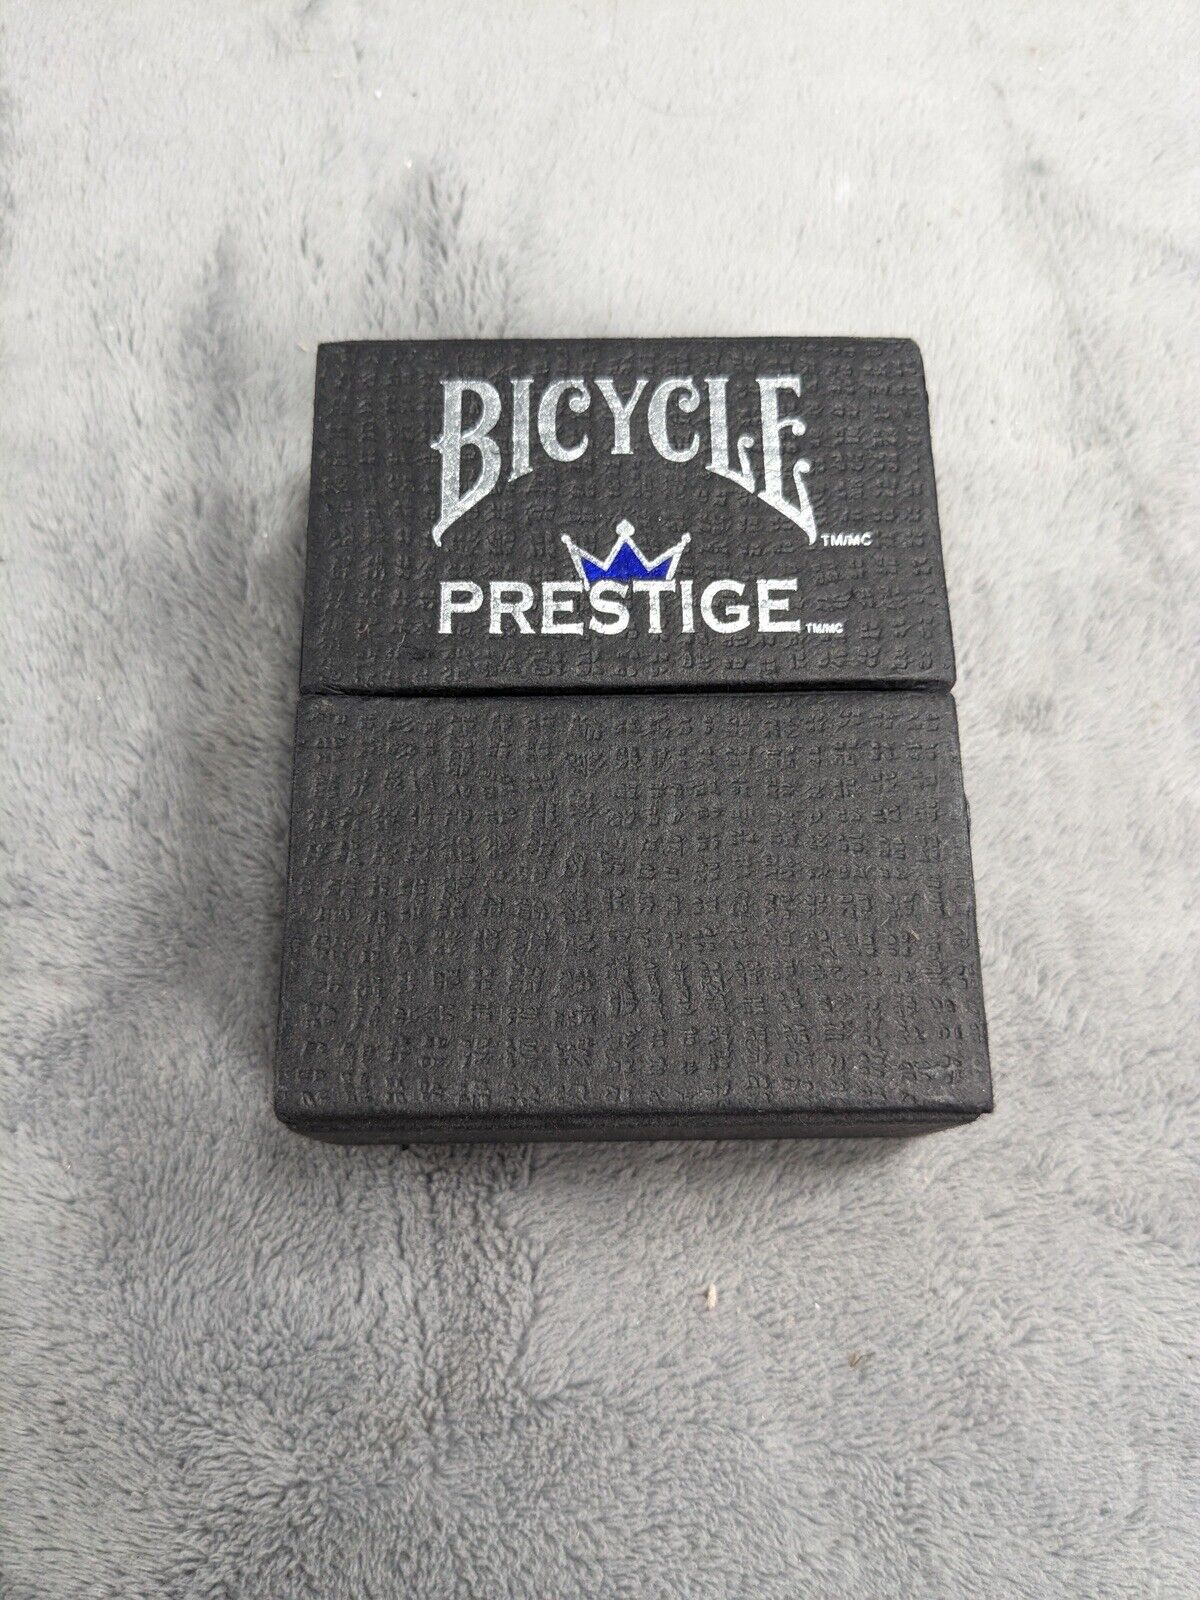 Bicycle Prestige Playing Cards Blue Deck In Collectible Textured Box